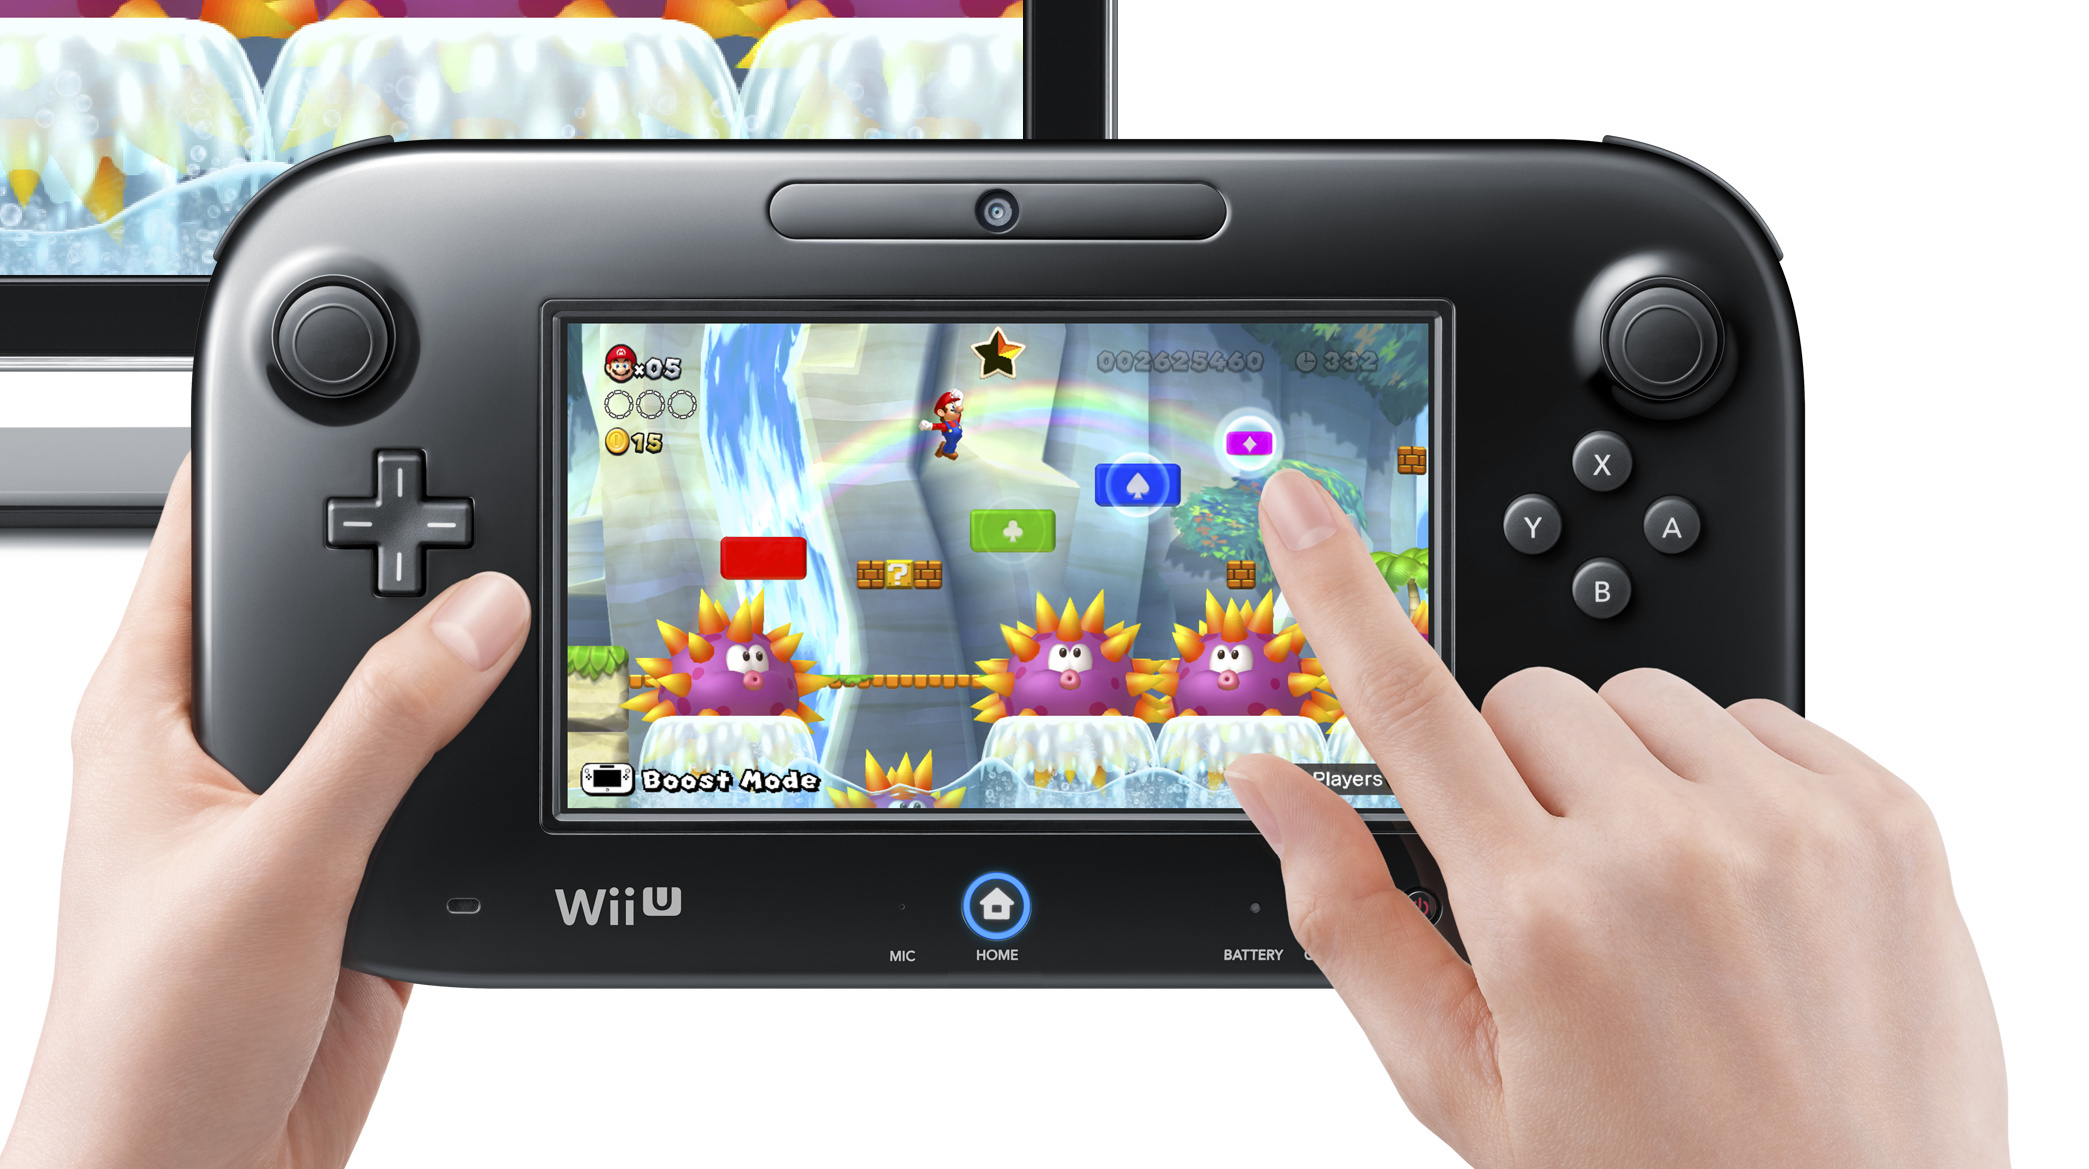 vase pige hver dag Brand-New Wii U Consoles Are Selling For A Ridiculous Price - GameSpot